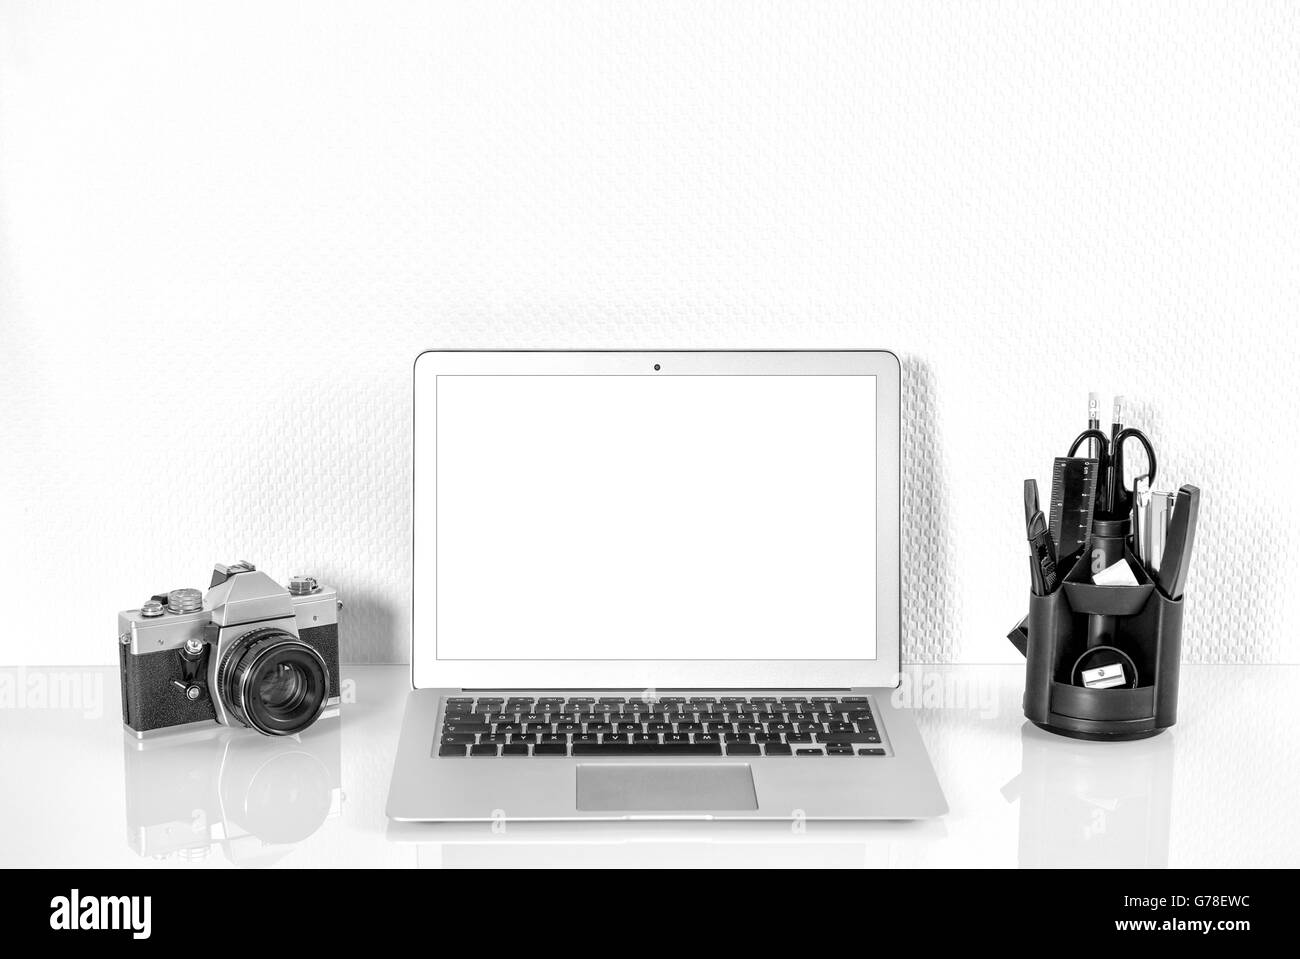 Working station with office supplies and analoge vintage Camera.  Workplace Mock Up with product display screen Stock Photo